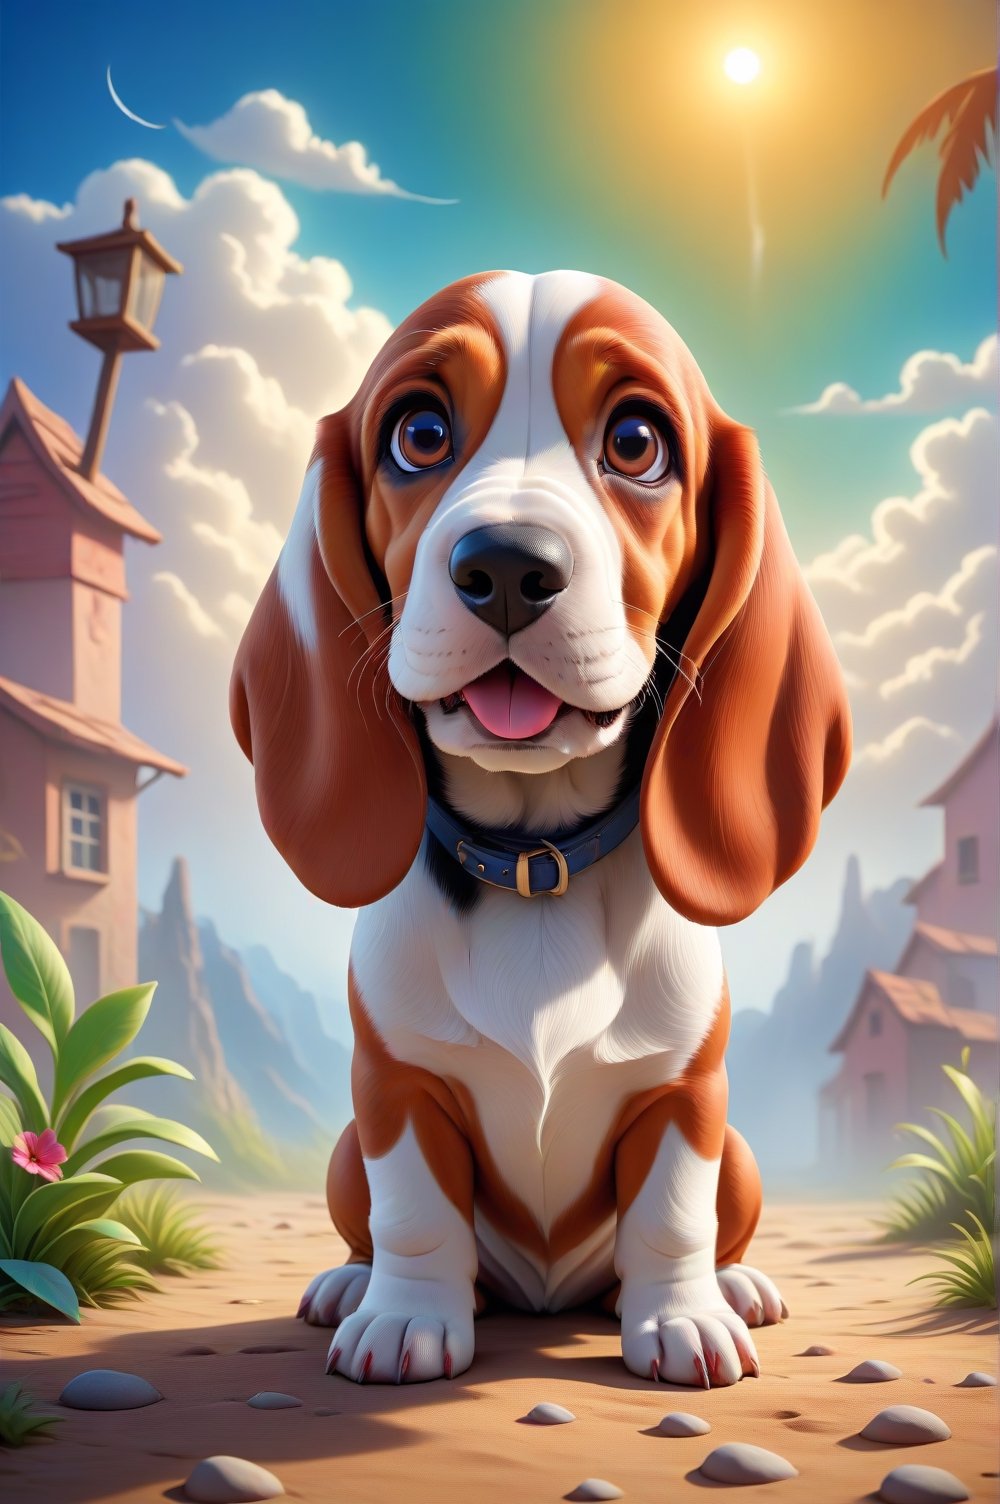 There is a little puppy (Basset Hound) sitting in a funny pose,  beautiful digital painting,  cute digital art,  cute little dog,  cute detailed digital art,  adorable and cute,  very cute little dog,  a cute little dog,  beautiful 3D rendering,  cute little dog,  cute and adorable,  visual image of a cute and adorable puppy. Summer weather in the background.,,<lora:659095807385103906:1.0>